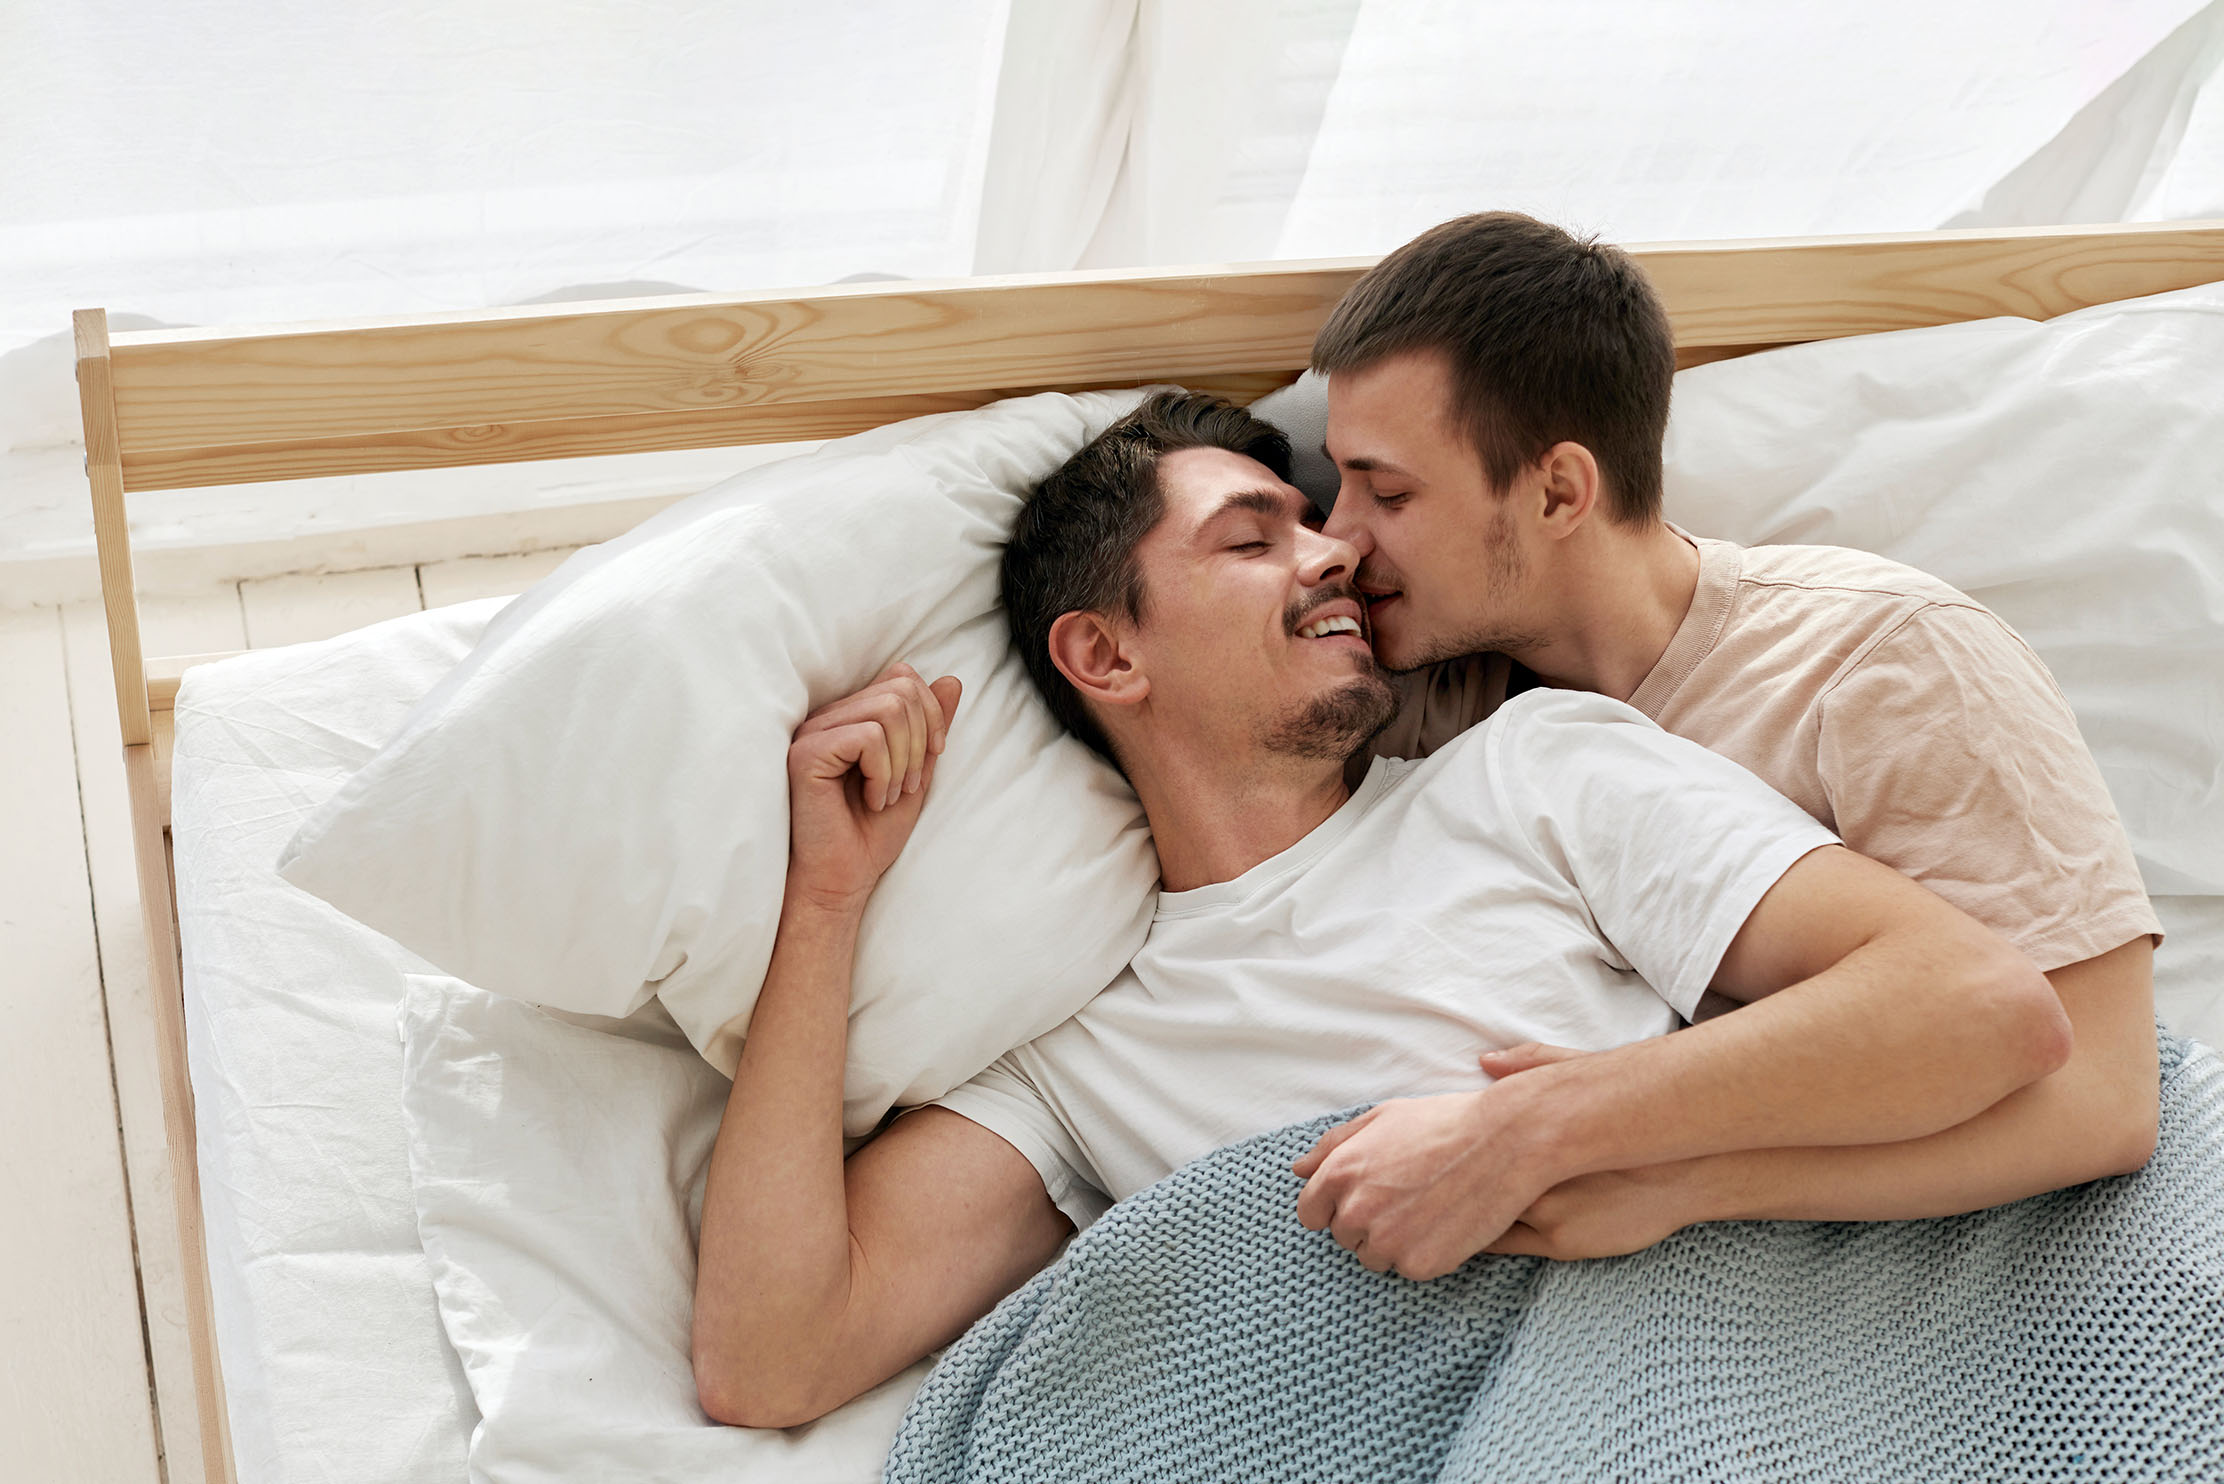 A same sex couple kiss and cuddle in bed